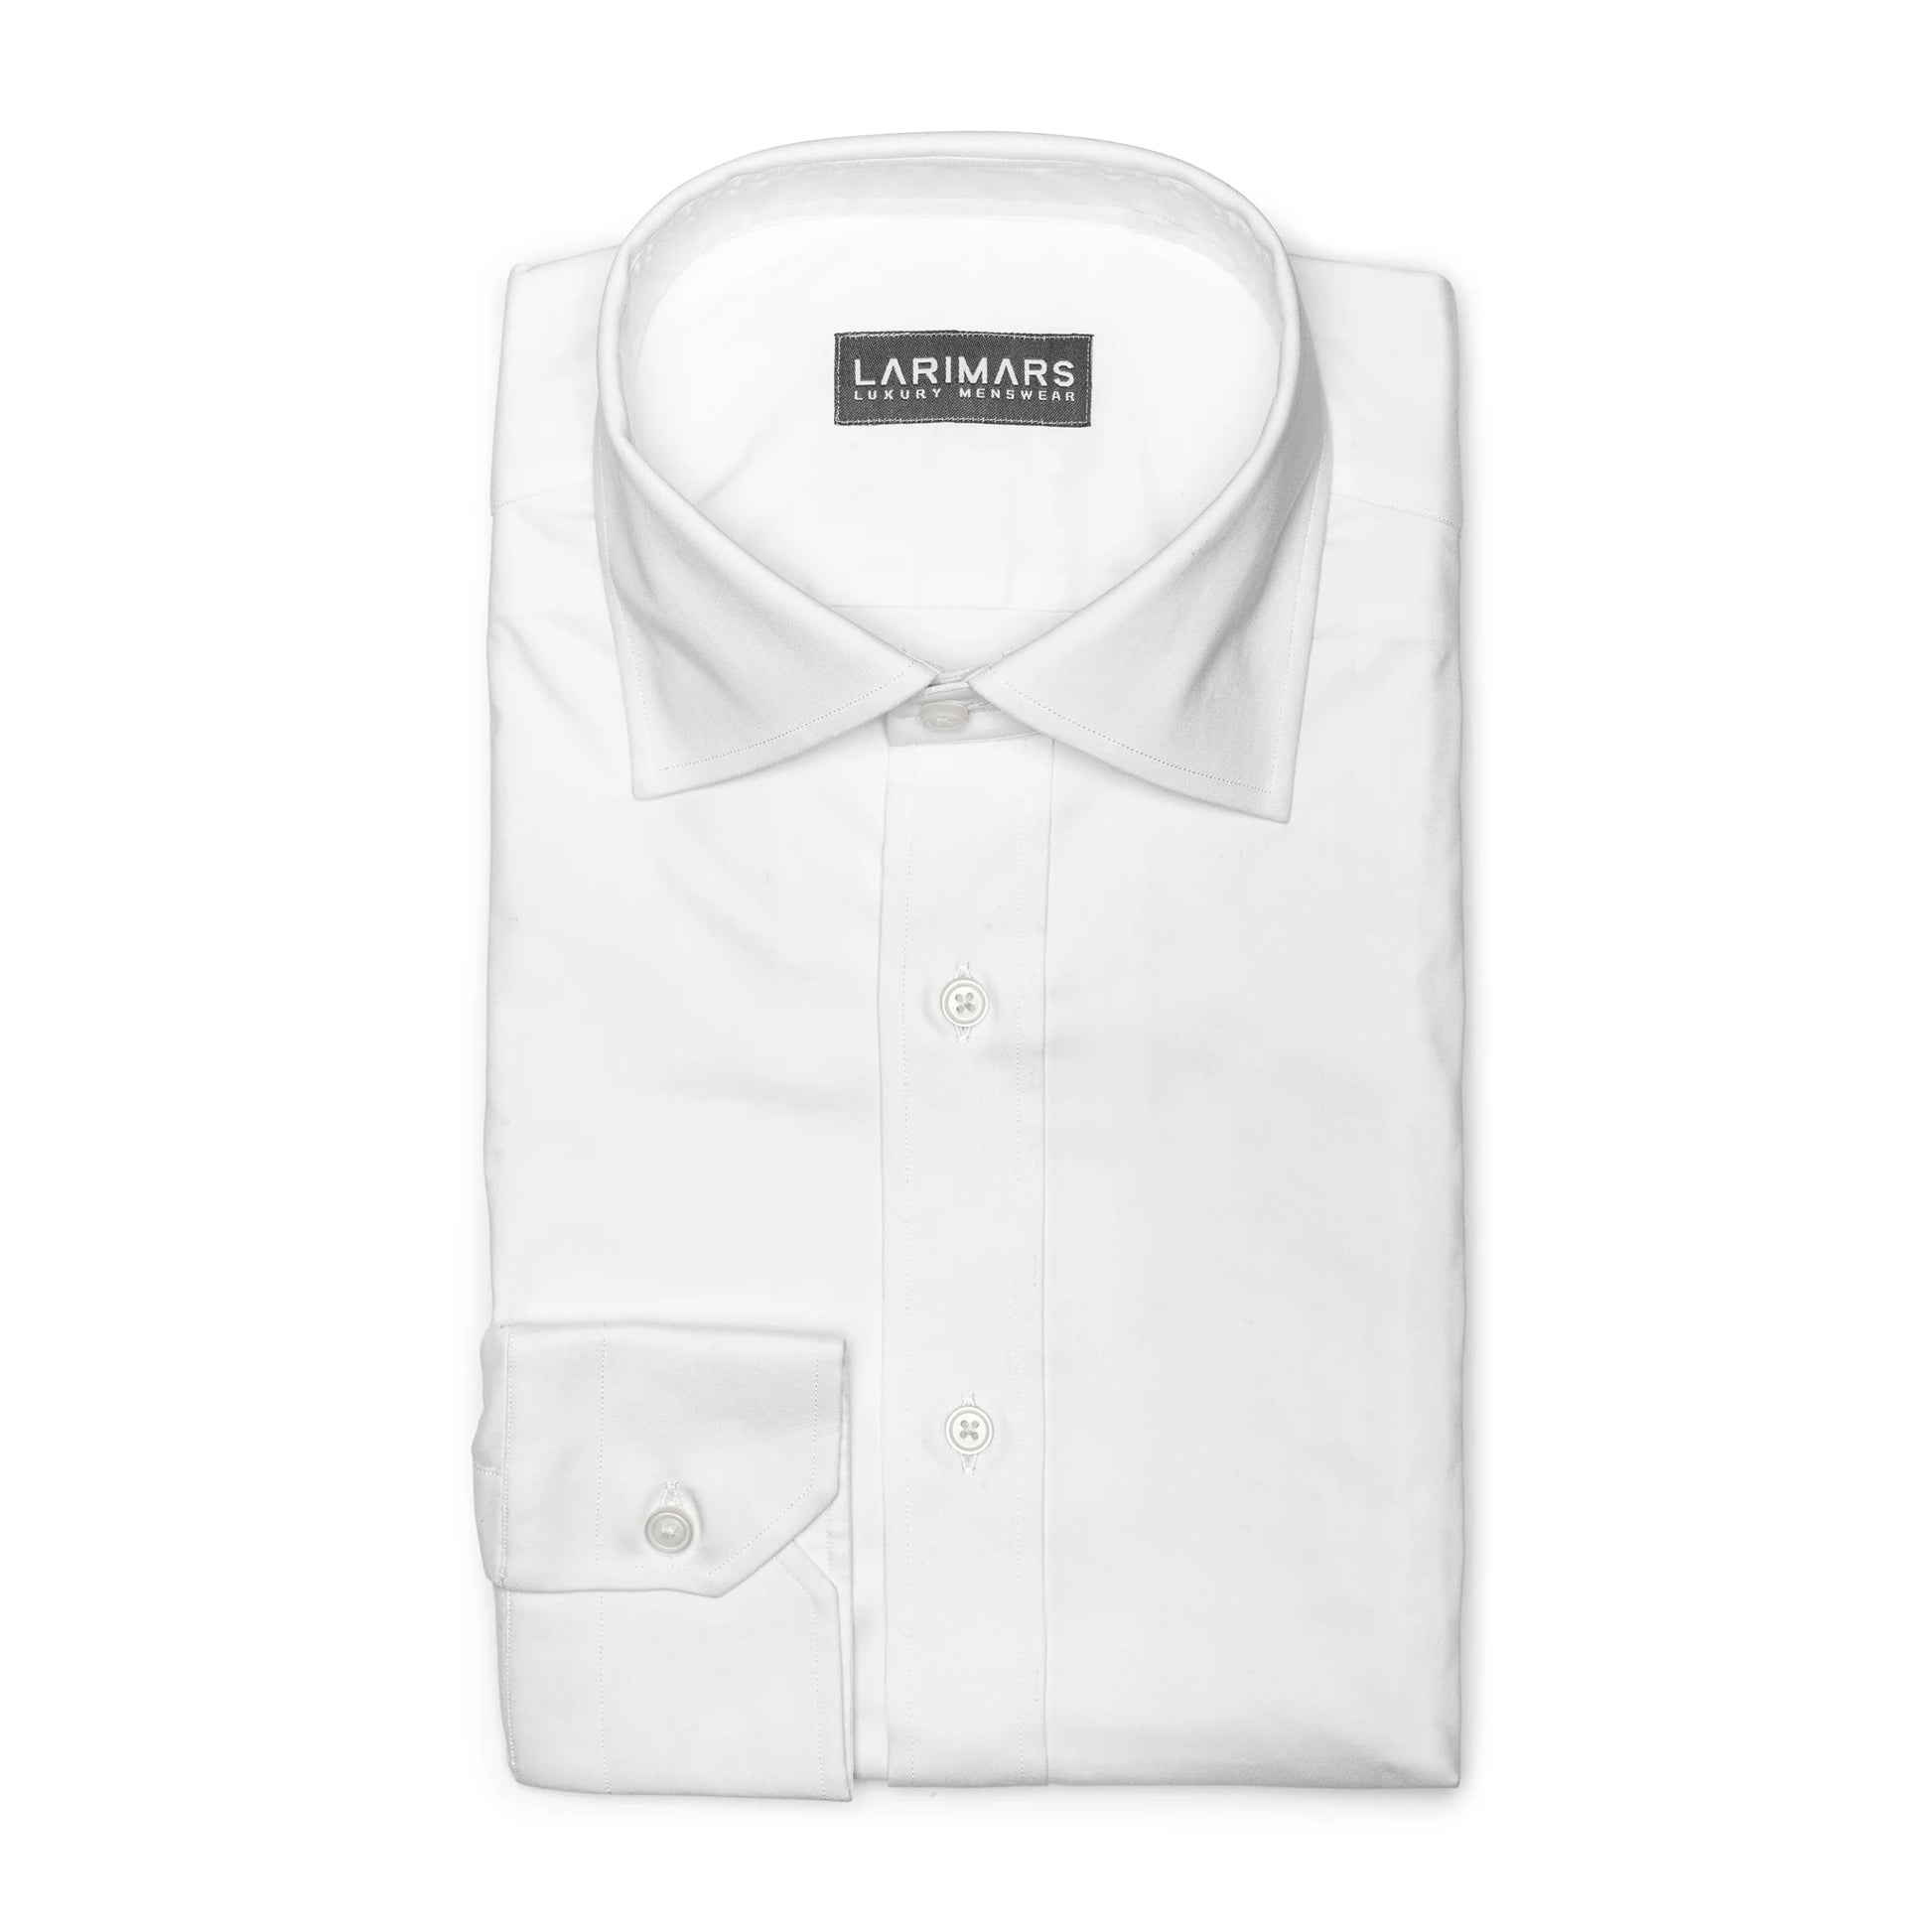 Signature White Twill - Larimars Clothing Men's Formal and casual wear shirts